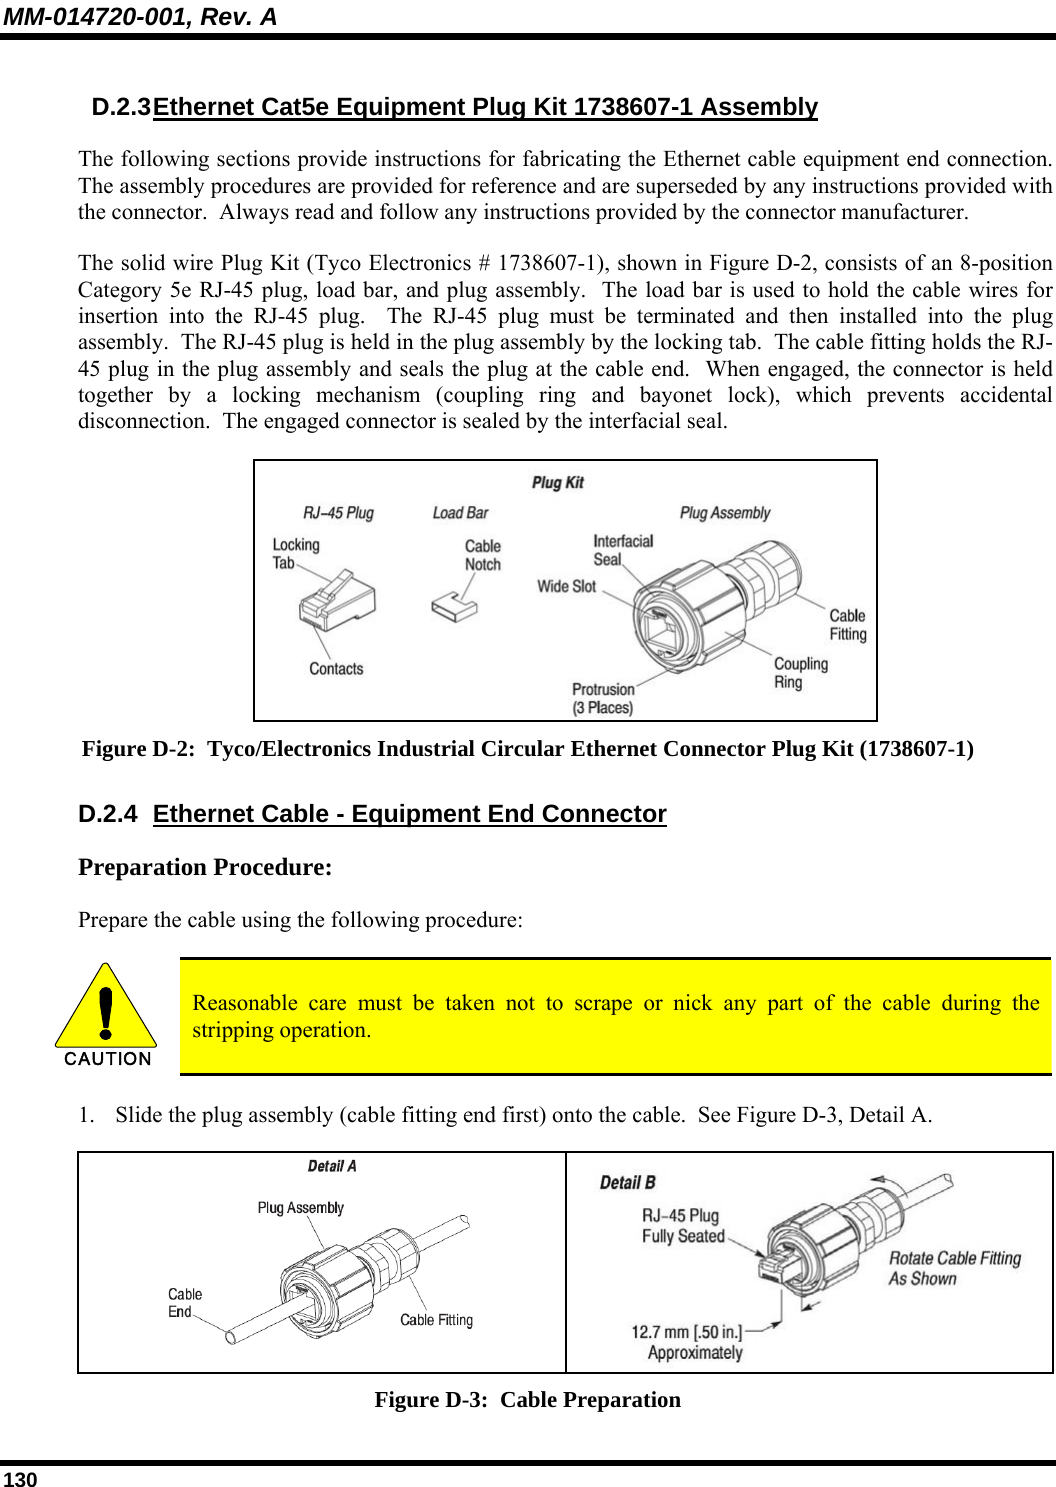 MM-014720-001, Rev. A 130 D.2.3 Ethernet Cat5e Equipment Plug Kit 1738607-1 Assembly The following sections provide instructions for fabricating the Ethernet cable equipment end connection.  The assembly procedures are provided for reference and are superseded by any instructions provided with the connector.  Always read and follow any instructions provided by the connector manufacturer. The solid wire Plug Kit (Tyco Electronics # 1738607-1), shown in Figure D-2, consists of an 8-position Category 5e RJ-45 plug, load bar, and plug assembly.  The load bar is used to hold the cable wires for insertion into the RJ-45 plug.  The RJ-45 plug must be terminated and then installed into the plug assembly.  The RJ-45 plug is held in the plug assembly by the locking tab.  The cable fitting holds the RJ-45 plug in the plug assembly and seals the plug at the cable end.  When engaged, the connector is held together by a locking mechanism (coupling ring and bayonet lock), which prevents accidental disconnection.  The engaged connector is sealed by the interfacial seal.  Figure D-2:  Tyco/Electronics Industrial Circular Ethernet Connector Plug Kit (1738607-1) D.2.4  Ethernet Cable - Equipment End Connector Preparation Procedure: Prepare the cable using the following procedure:  CAUTION  Reasonable care must be taken not to scrape or nick any part of the cable during the stripping operation. 1. Slide the plug assembly (cable fitting end first) onto the cable.  See Figure D-3, Detail A.    Figure D-3:  Cable Preparation 